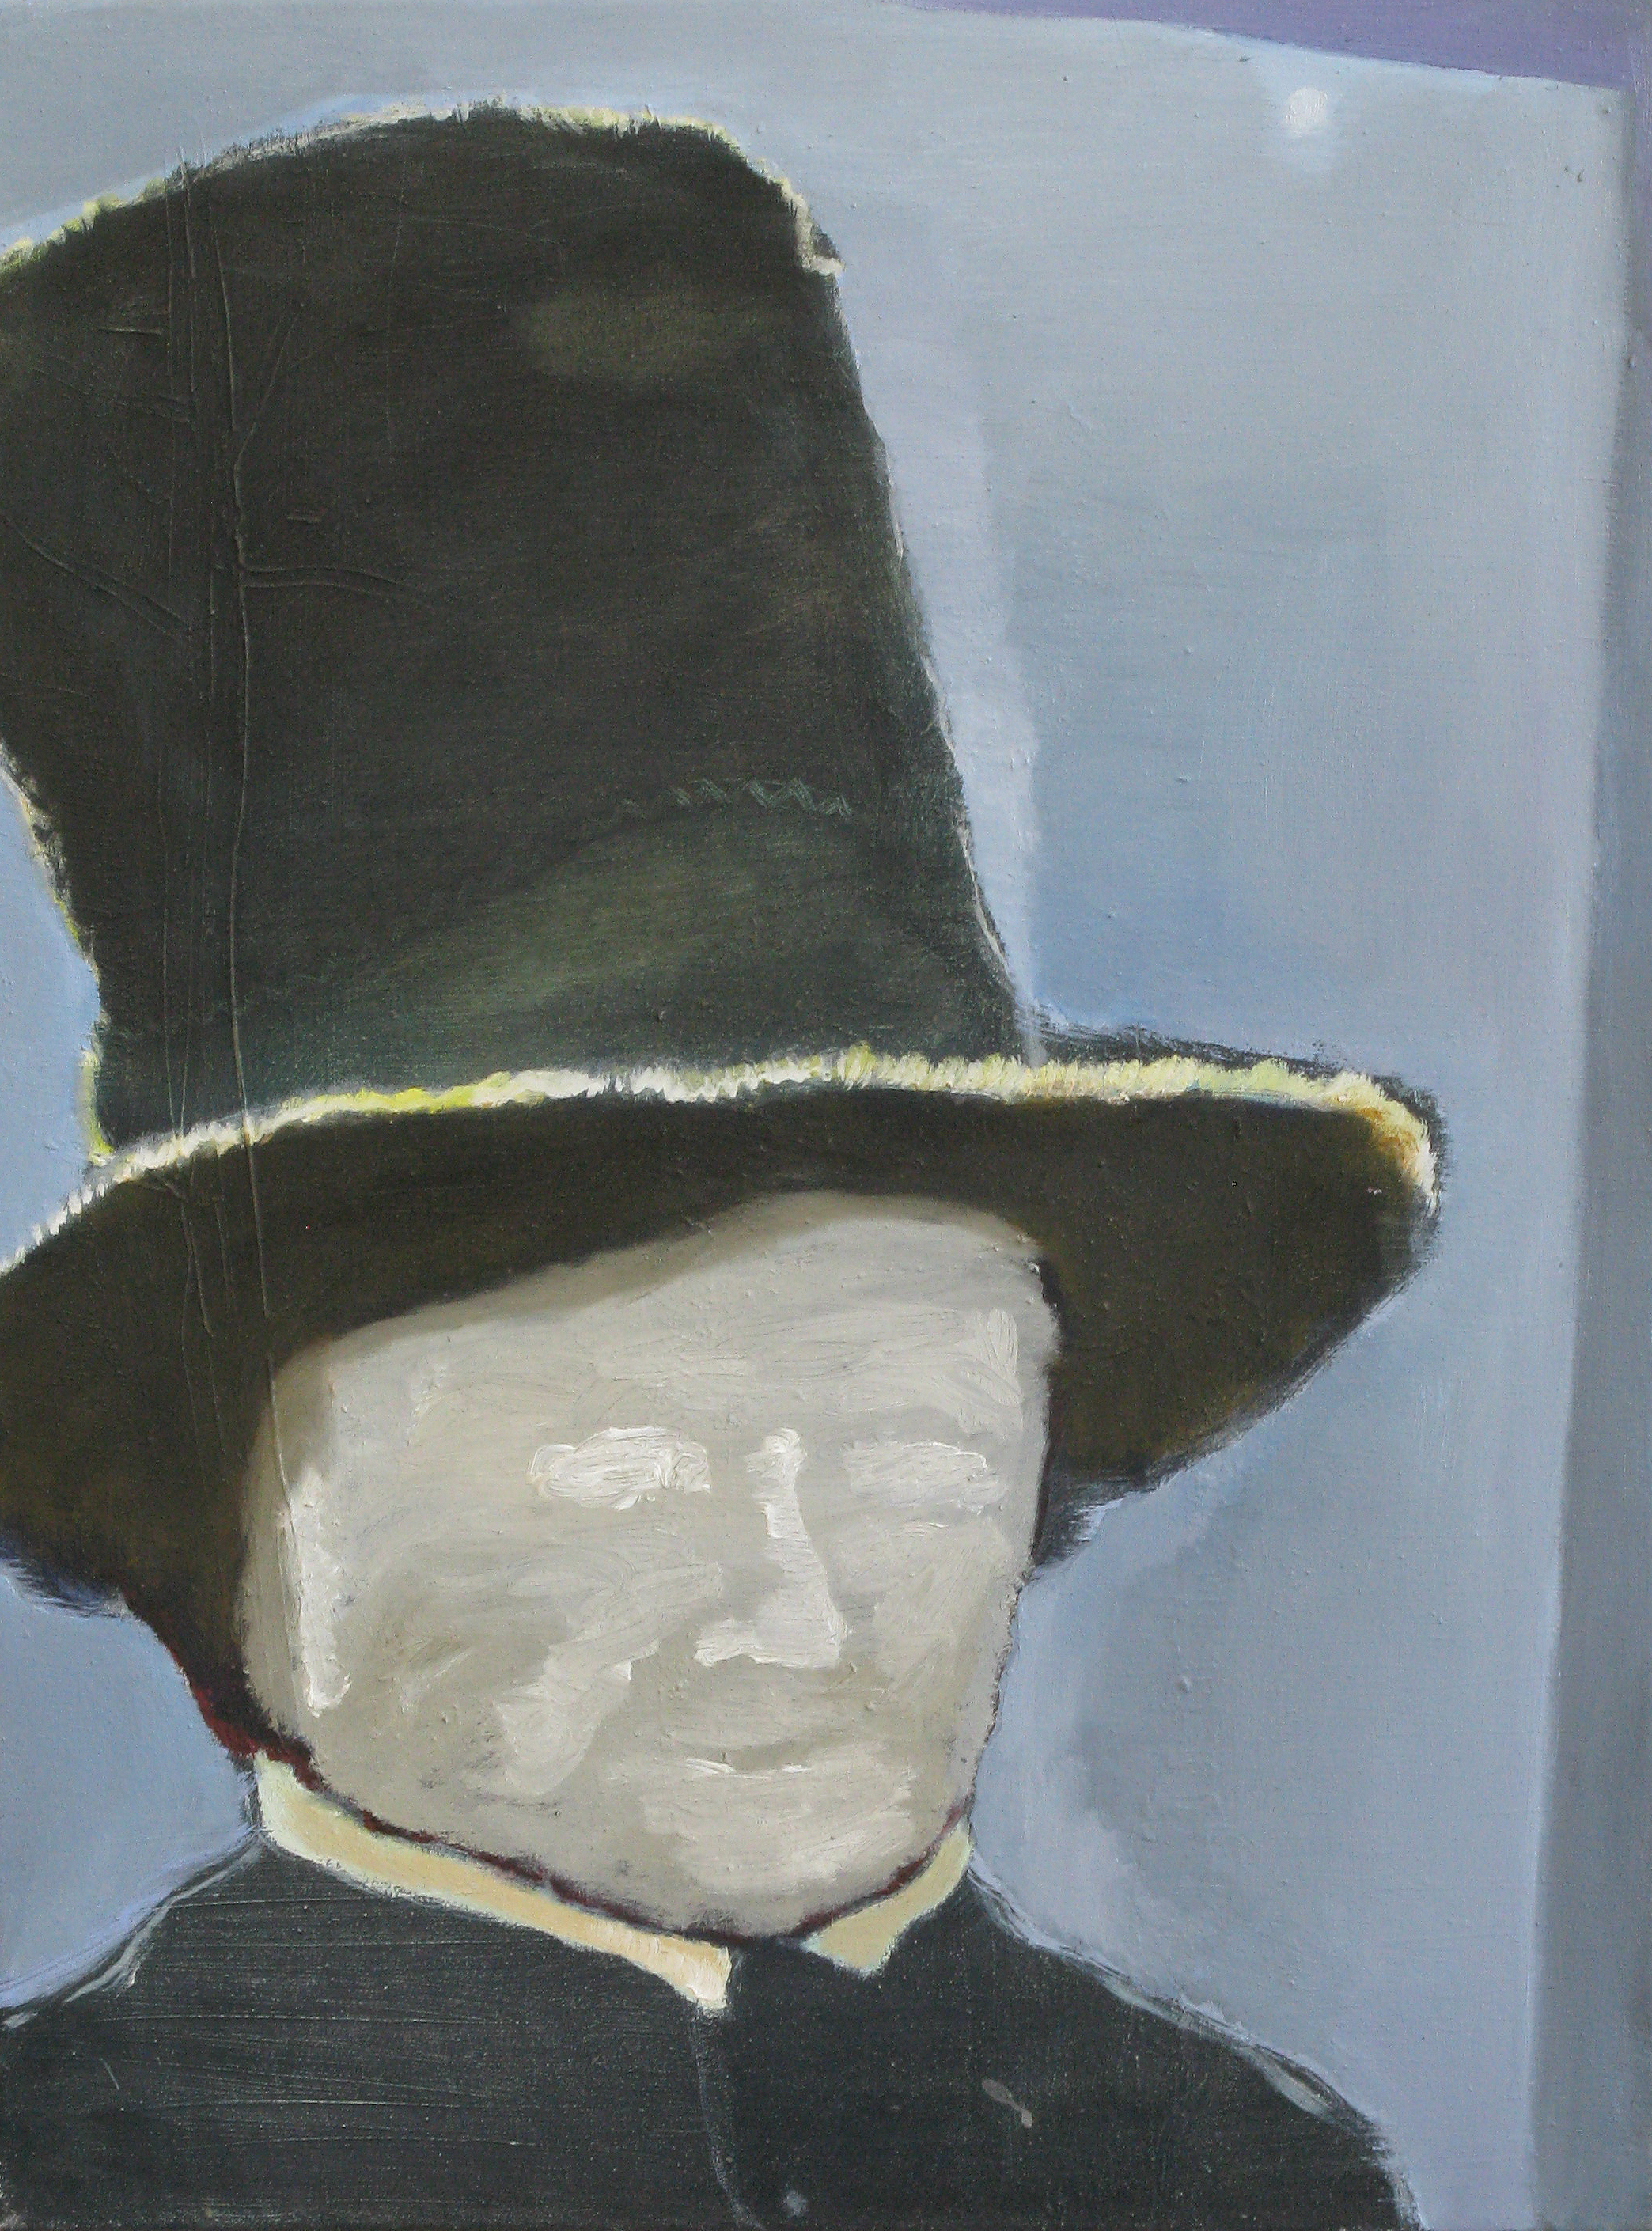   CHRISTOPH ROßNER   Man With Hat,&nbsp; oil on canvas, 23.5" x 17.75", 2009 